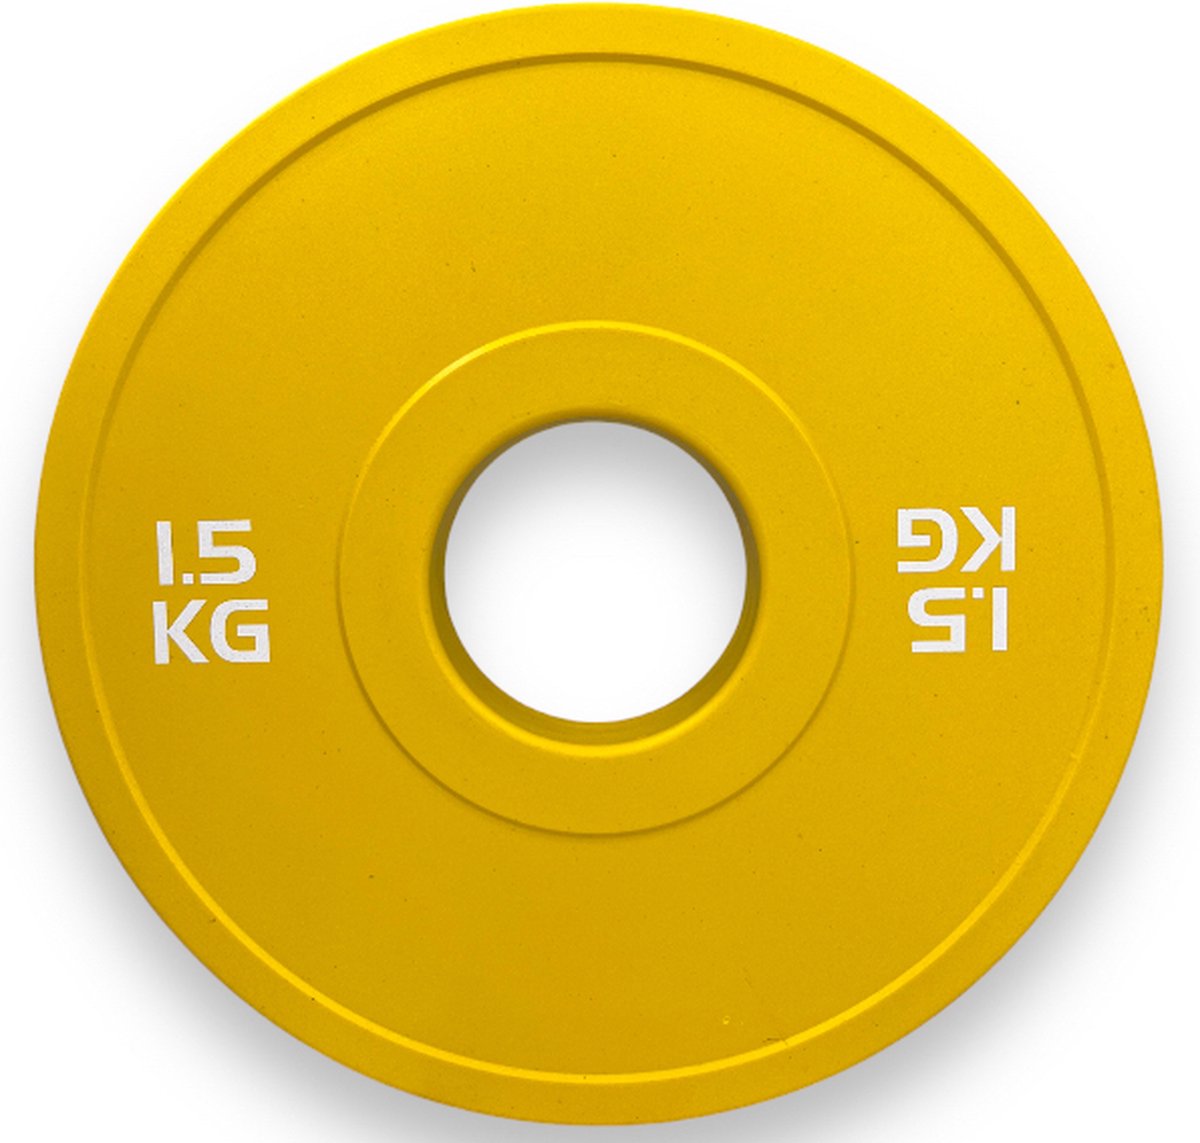 Padisport - Fractional Plates - 1,5 KG - Olympische Halterschijven - Fractional Plate 1.5kg - Olympische Gewichten - Halterschijven - Halterschijf 1.5 Kg